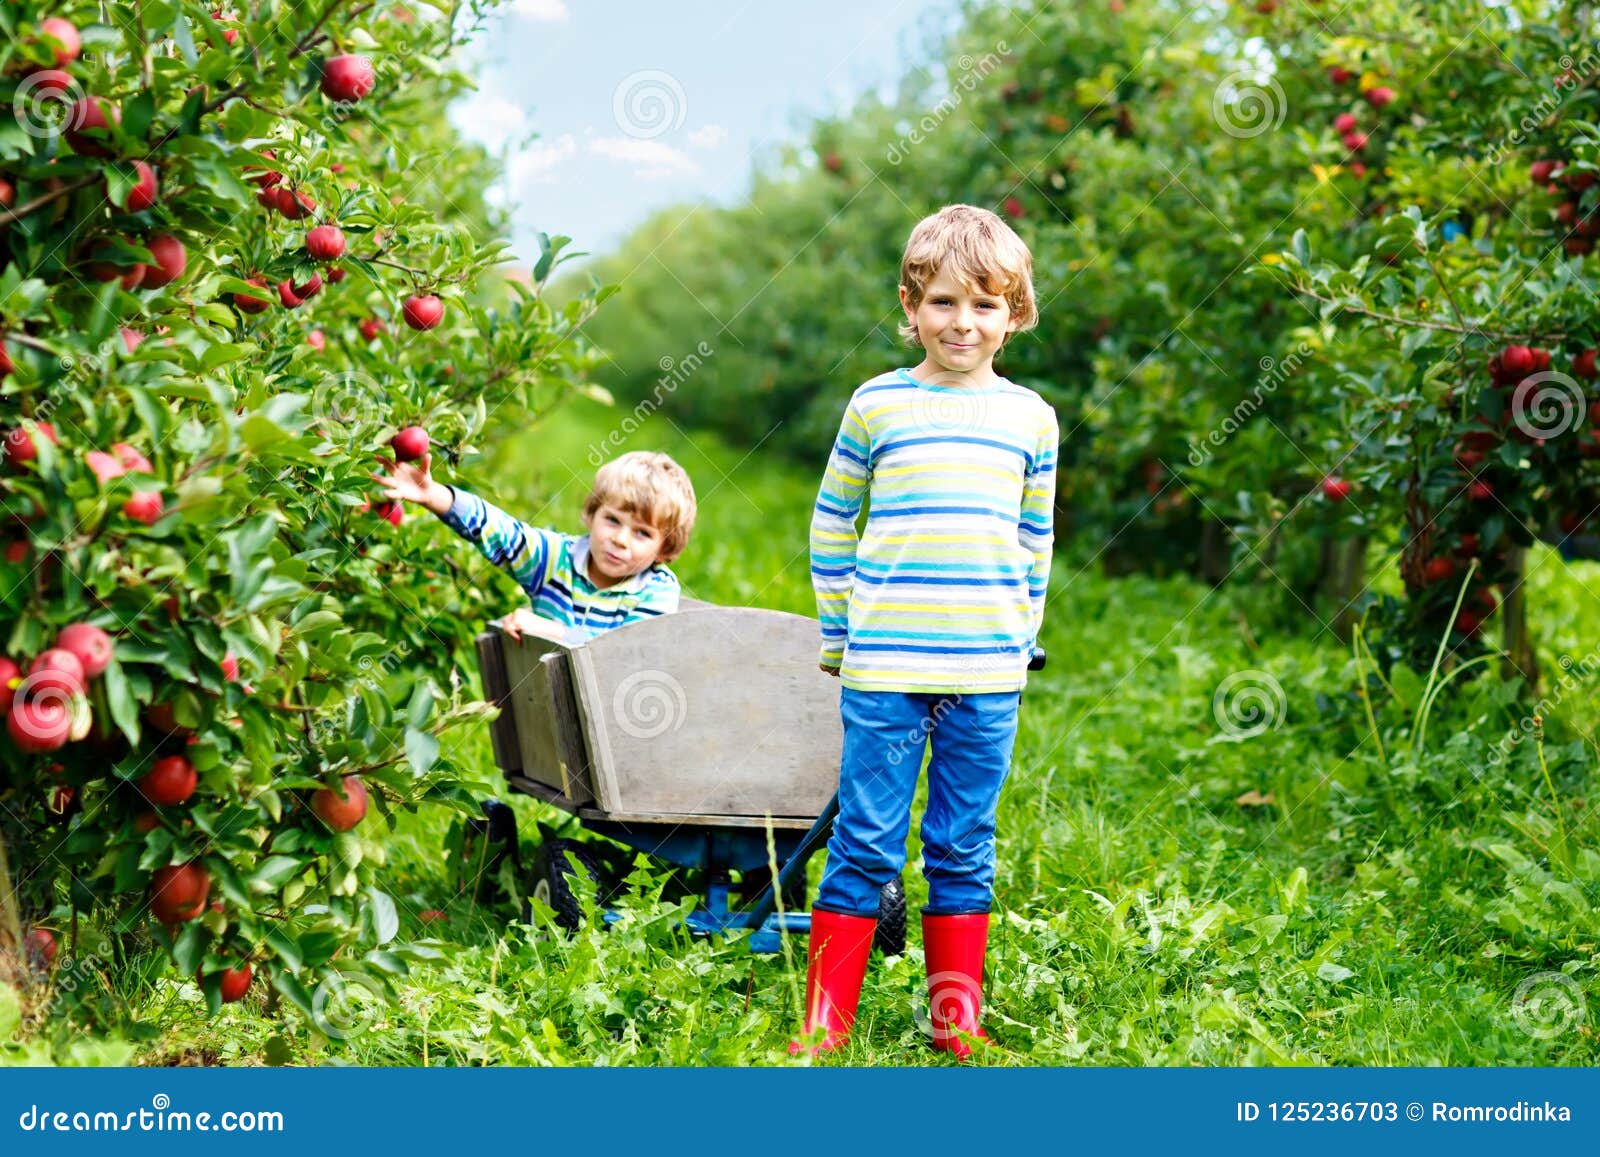 Two Adorable Happy Little Kids Boys Picking and Eating Red Apples on